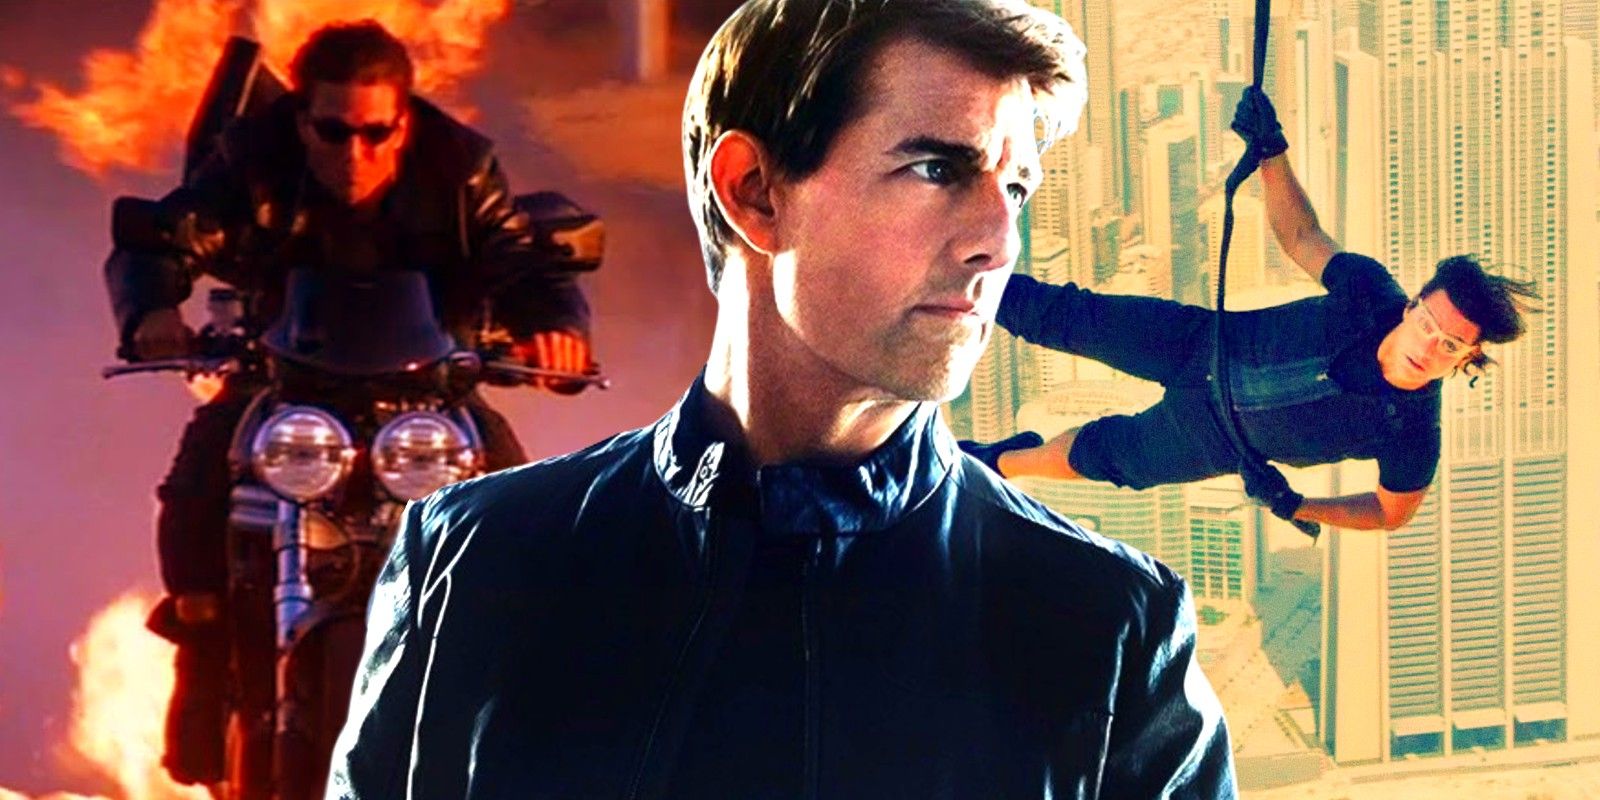 Paramount Home Entertainment Mission: Impossible - The 6-Movie